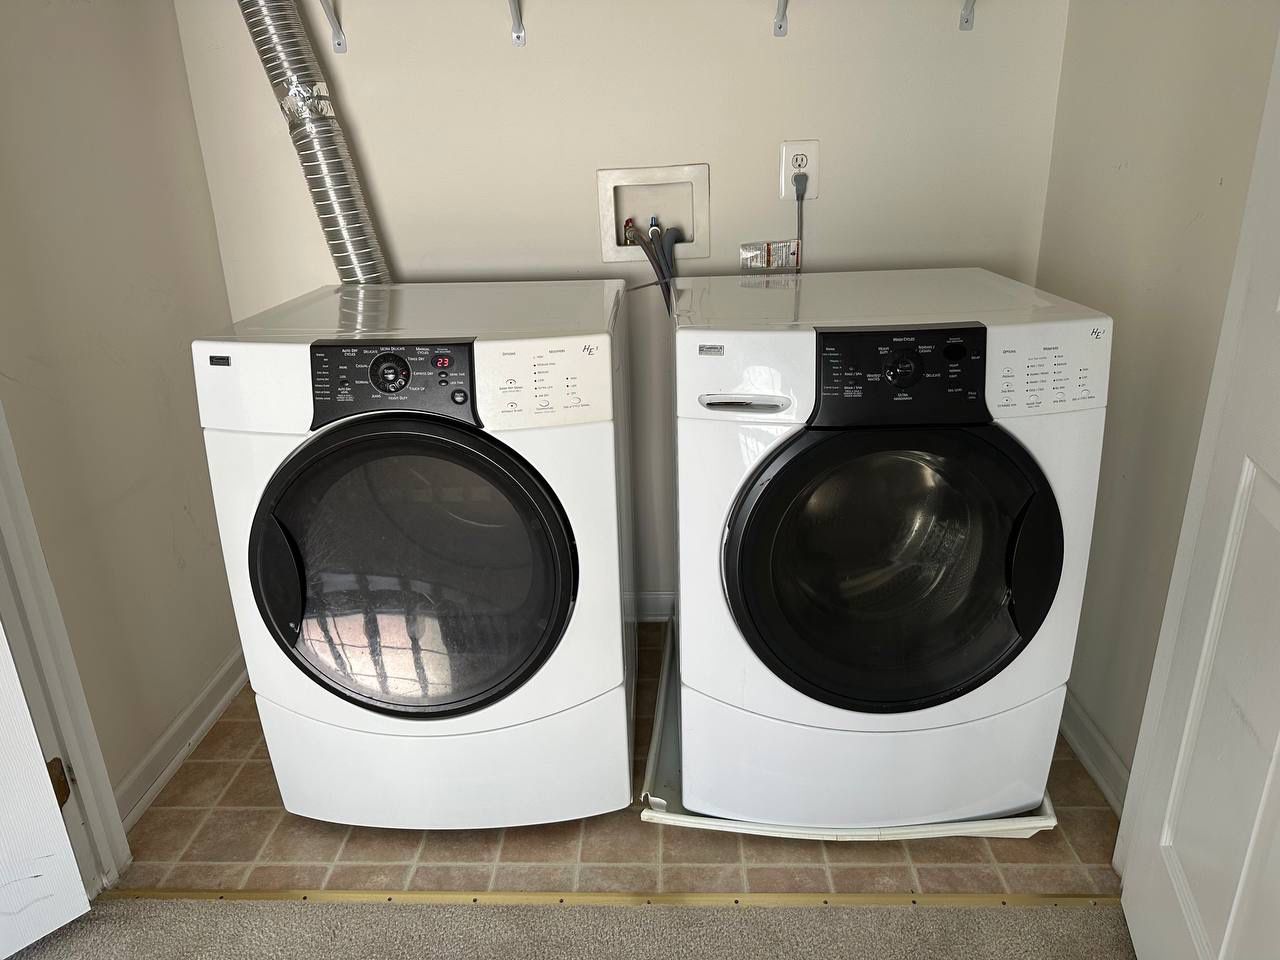 Kenmore washer & dryer for $250